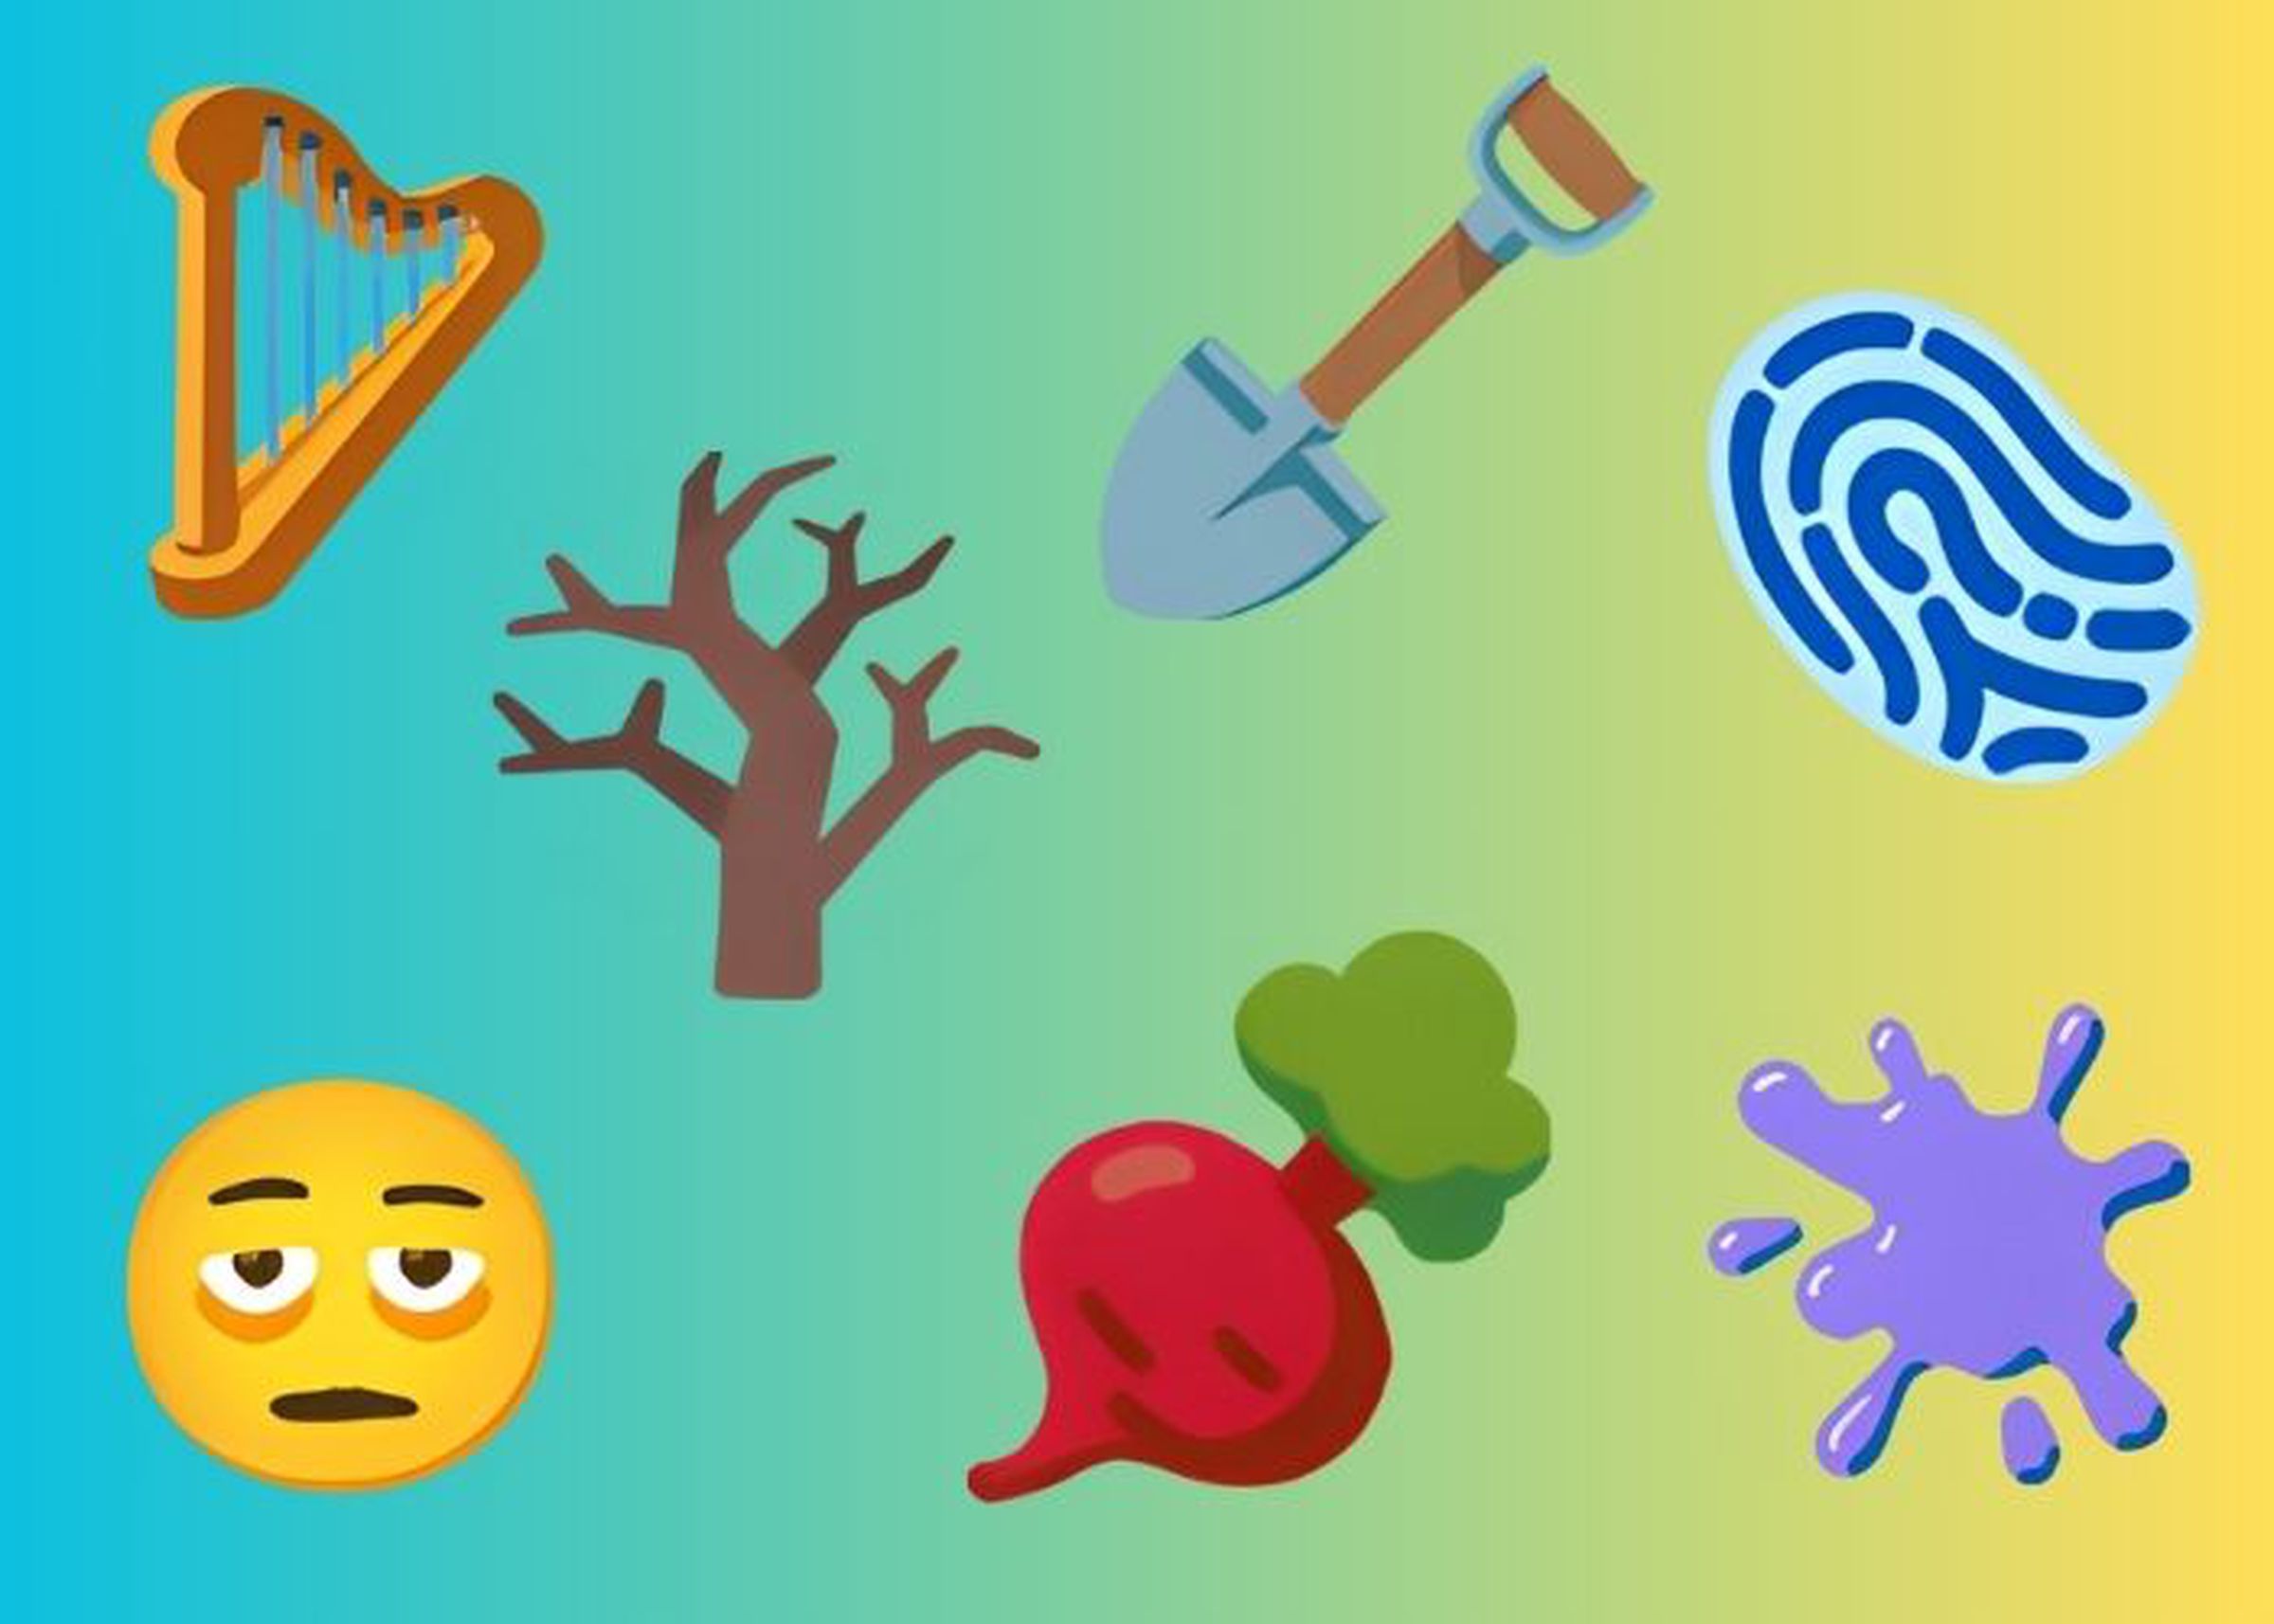 Seven new emojis coming to iOS: A face with eye bags, a leafless tree, a harp, a root vegetable, a fingerprint, a shovel, and a splat of color.